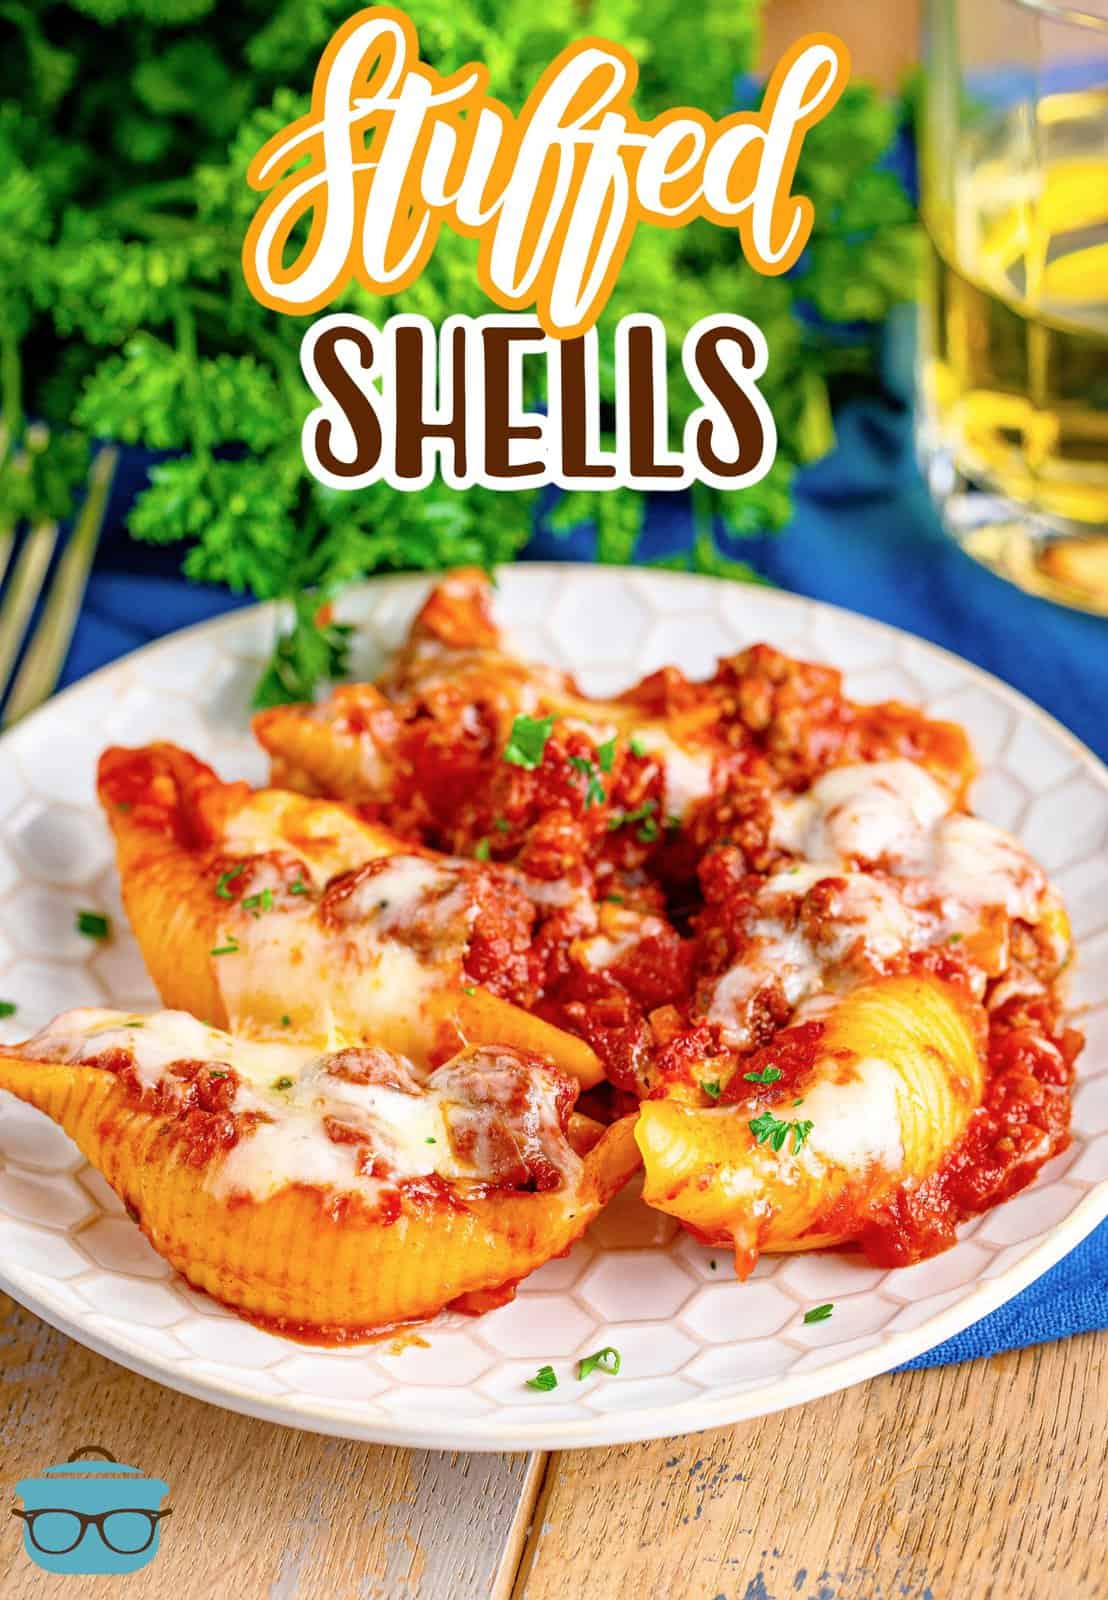 stuffed shells shown served on a small, round white plate with a glass of white wine and fresh parsley in the background.